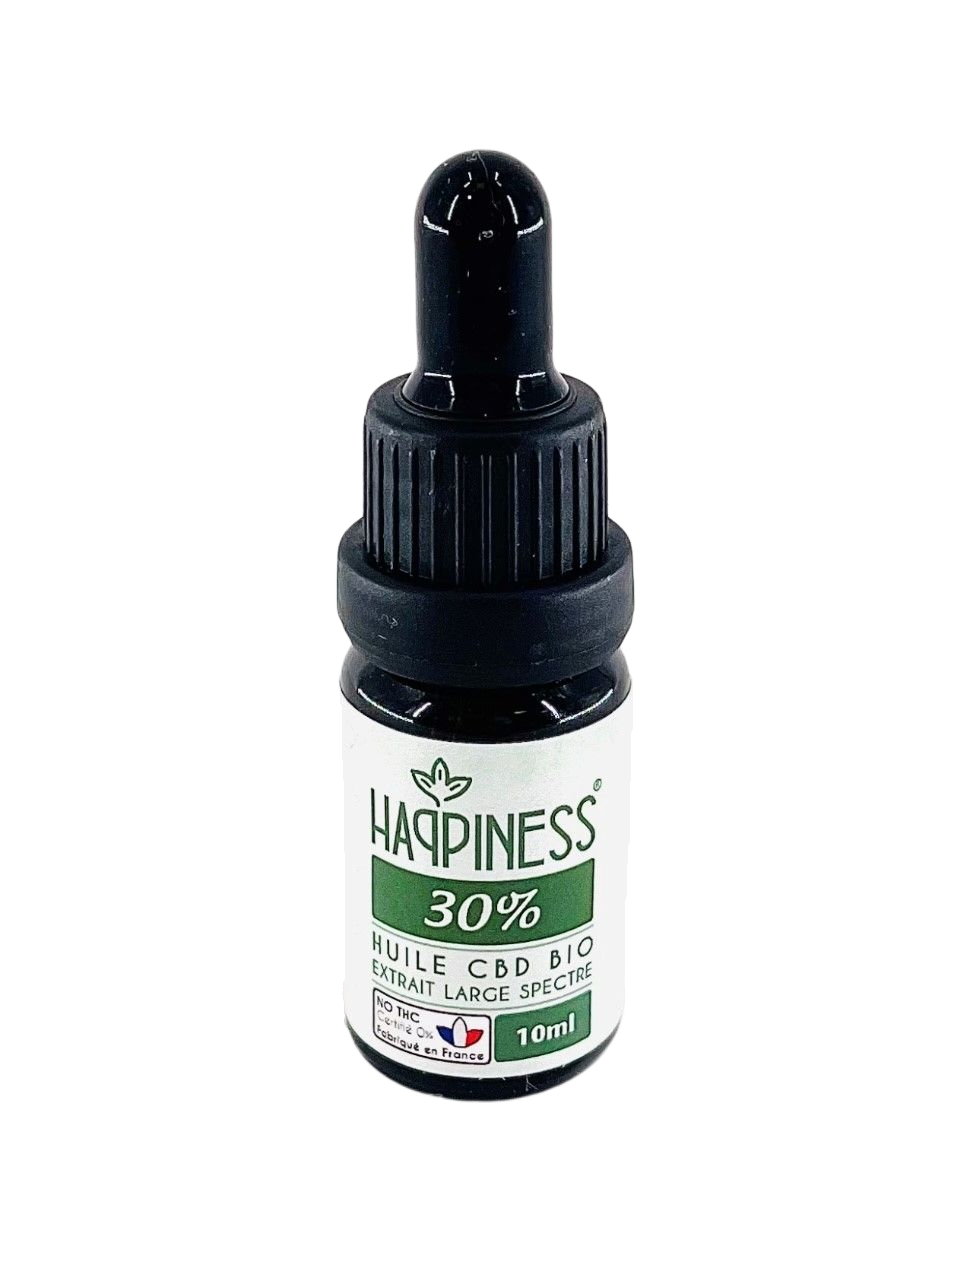 Happiness Huile CBD 30% Images